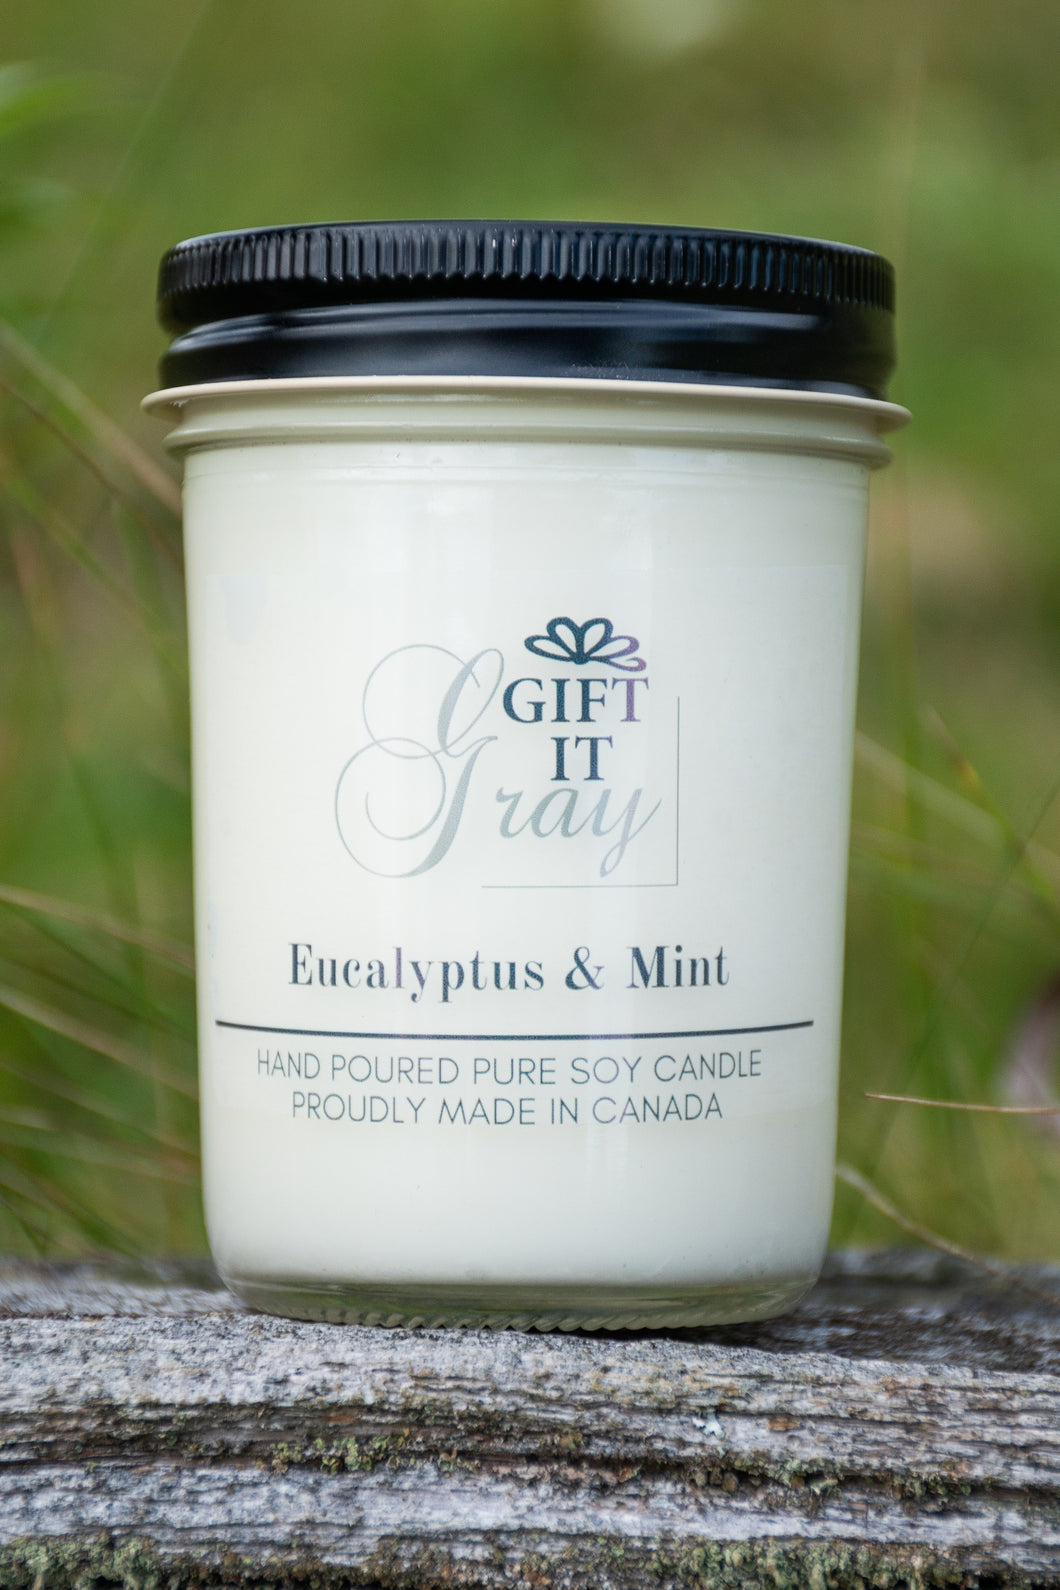 Eucalyptus & Mint Gift It Gray Soy Candle